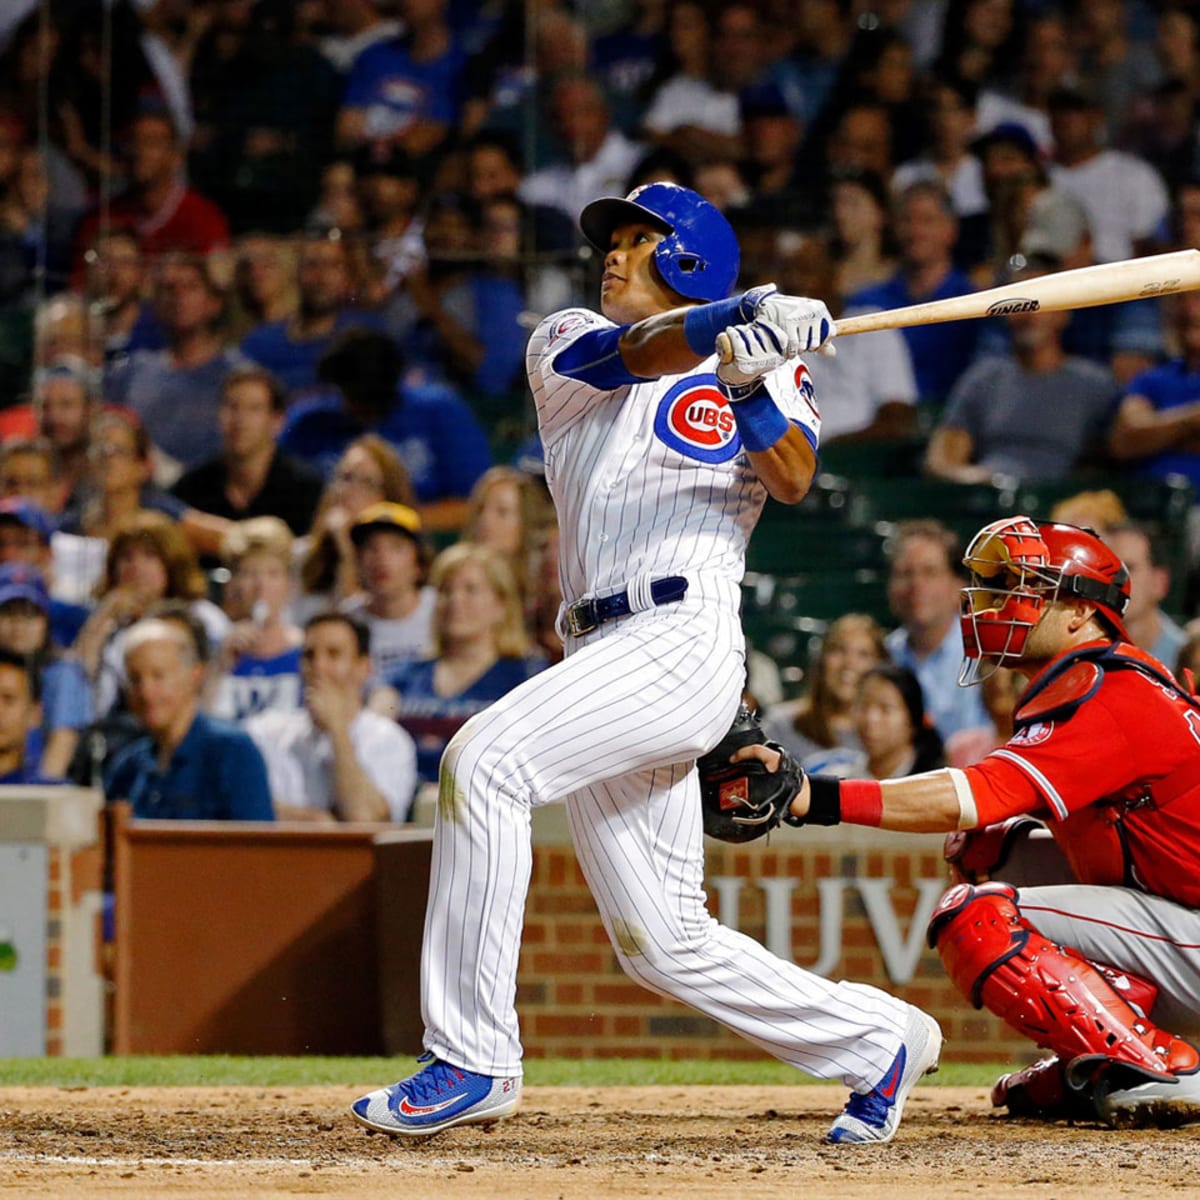 Did you know? Chicago Cubs All-Star shortstop Addison Russell is